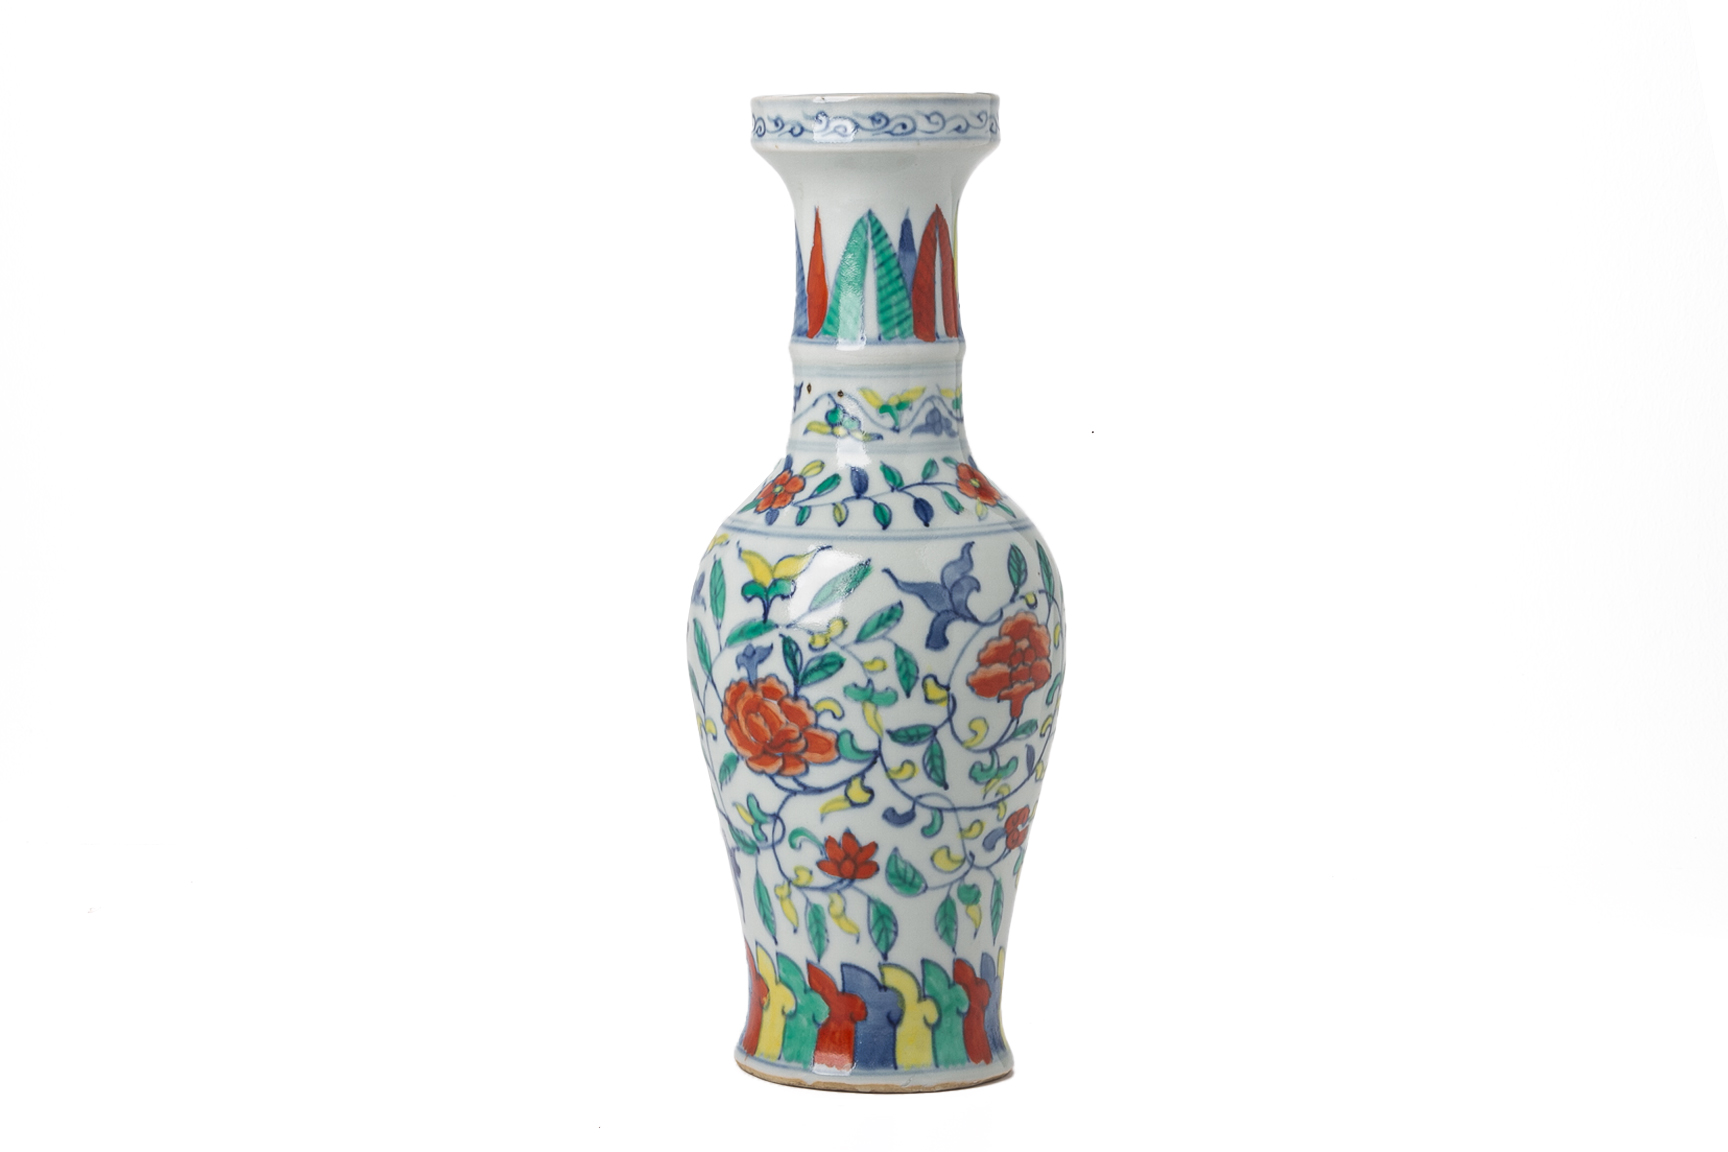 A CHINESE MING STYLE DOUCAI PORCELAIN VASE